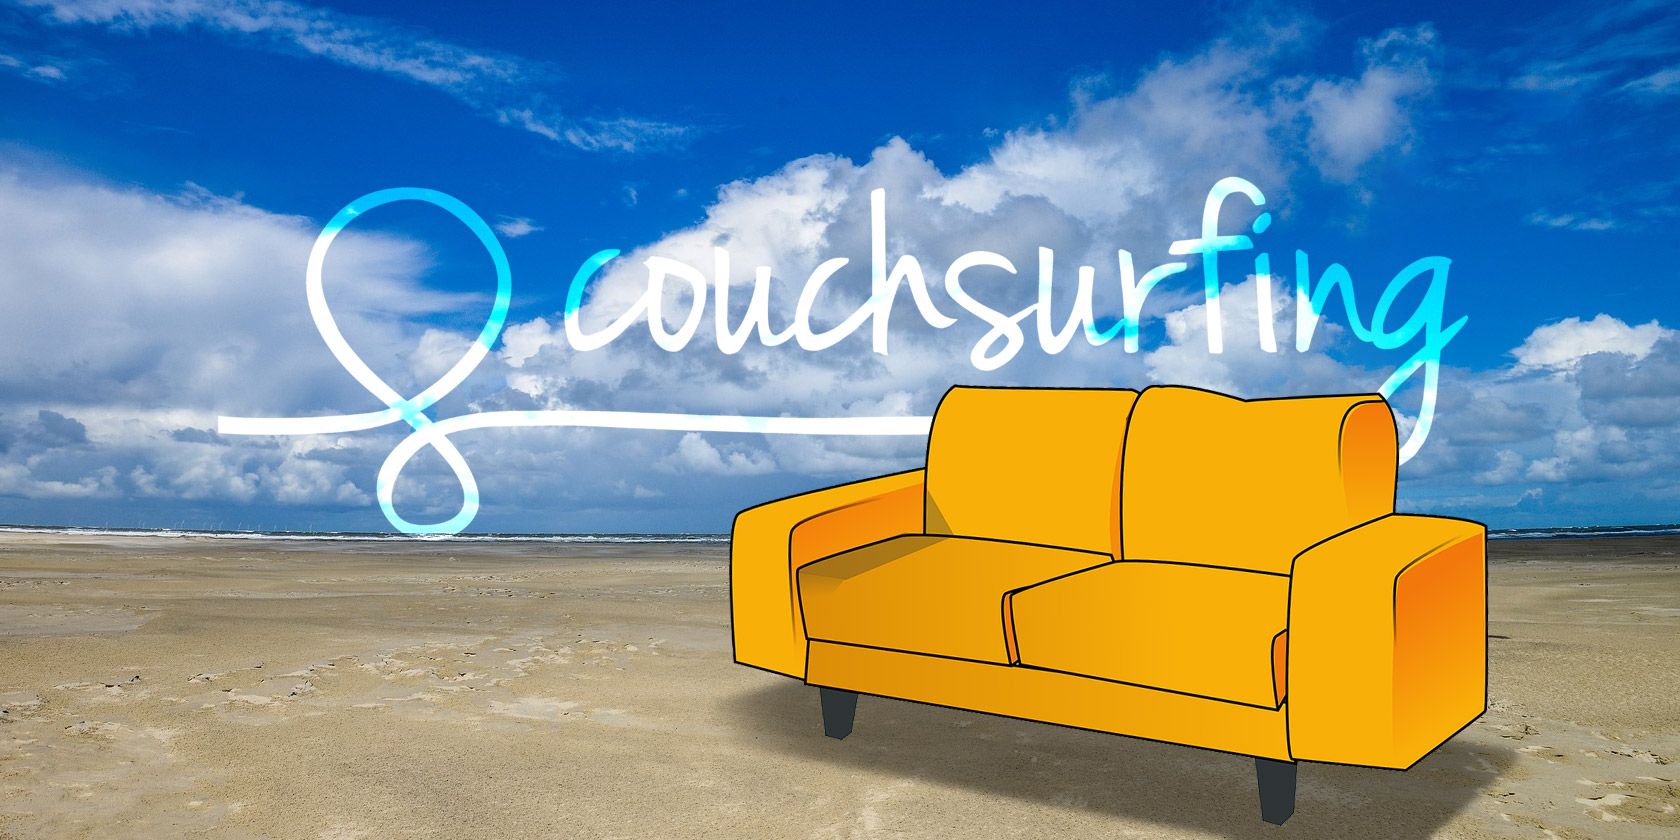 couchsurfing-hosting